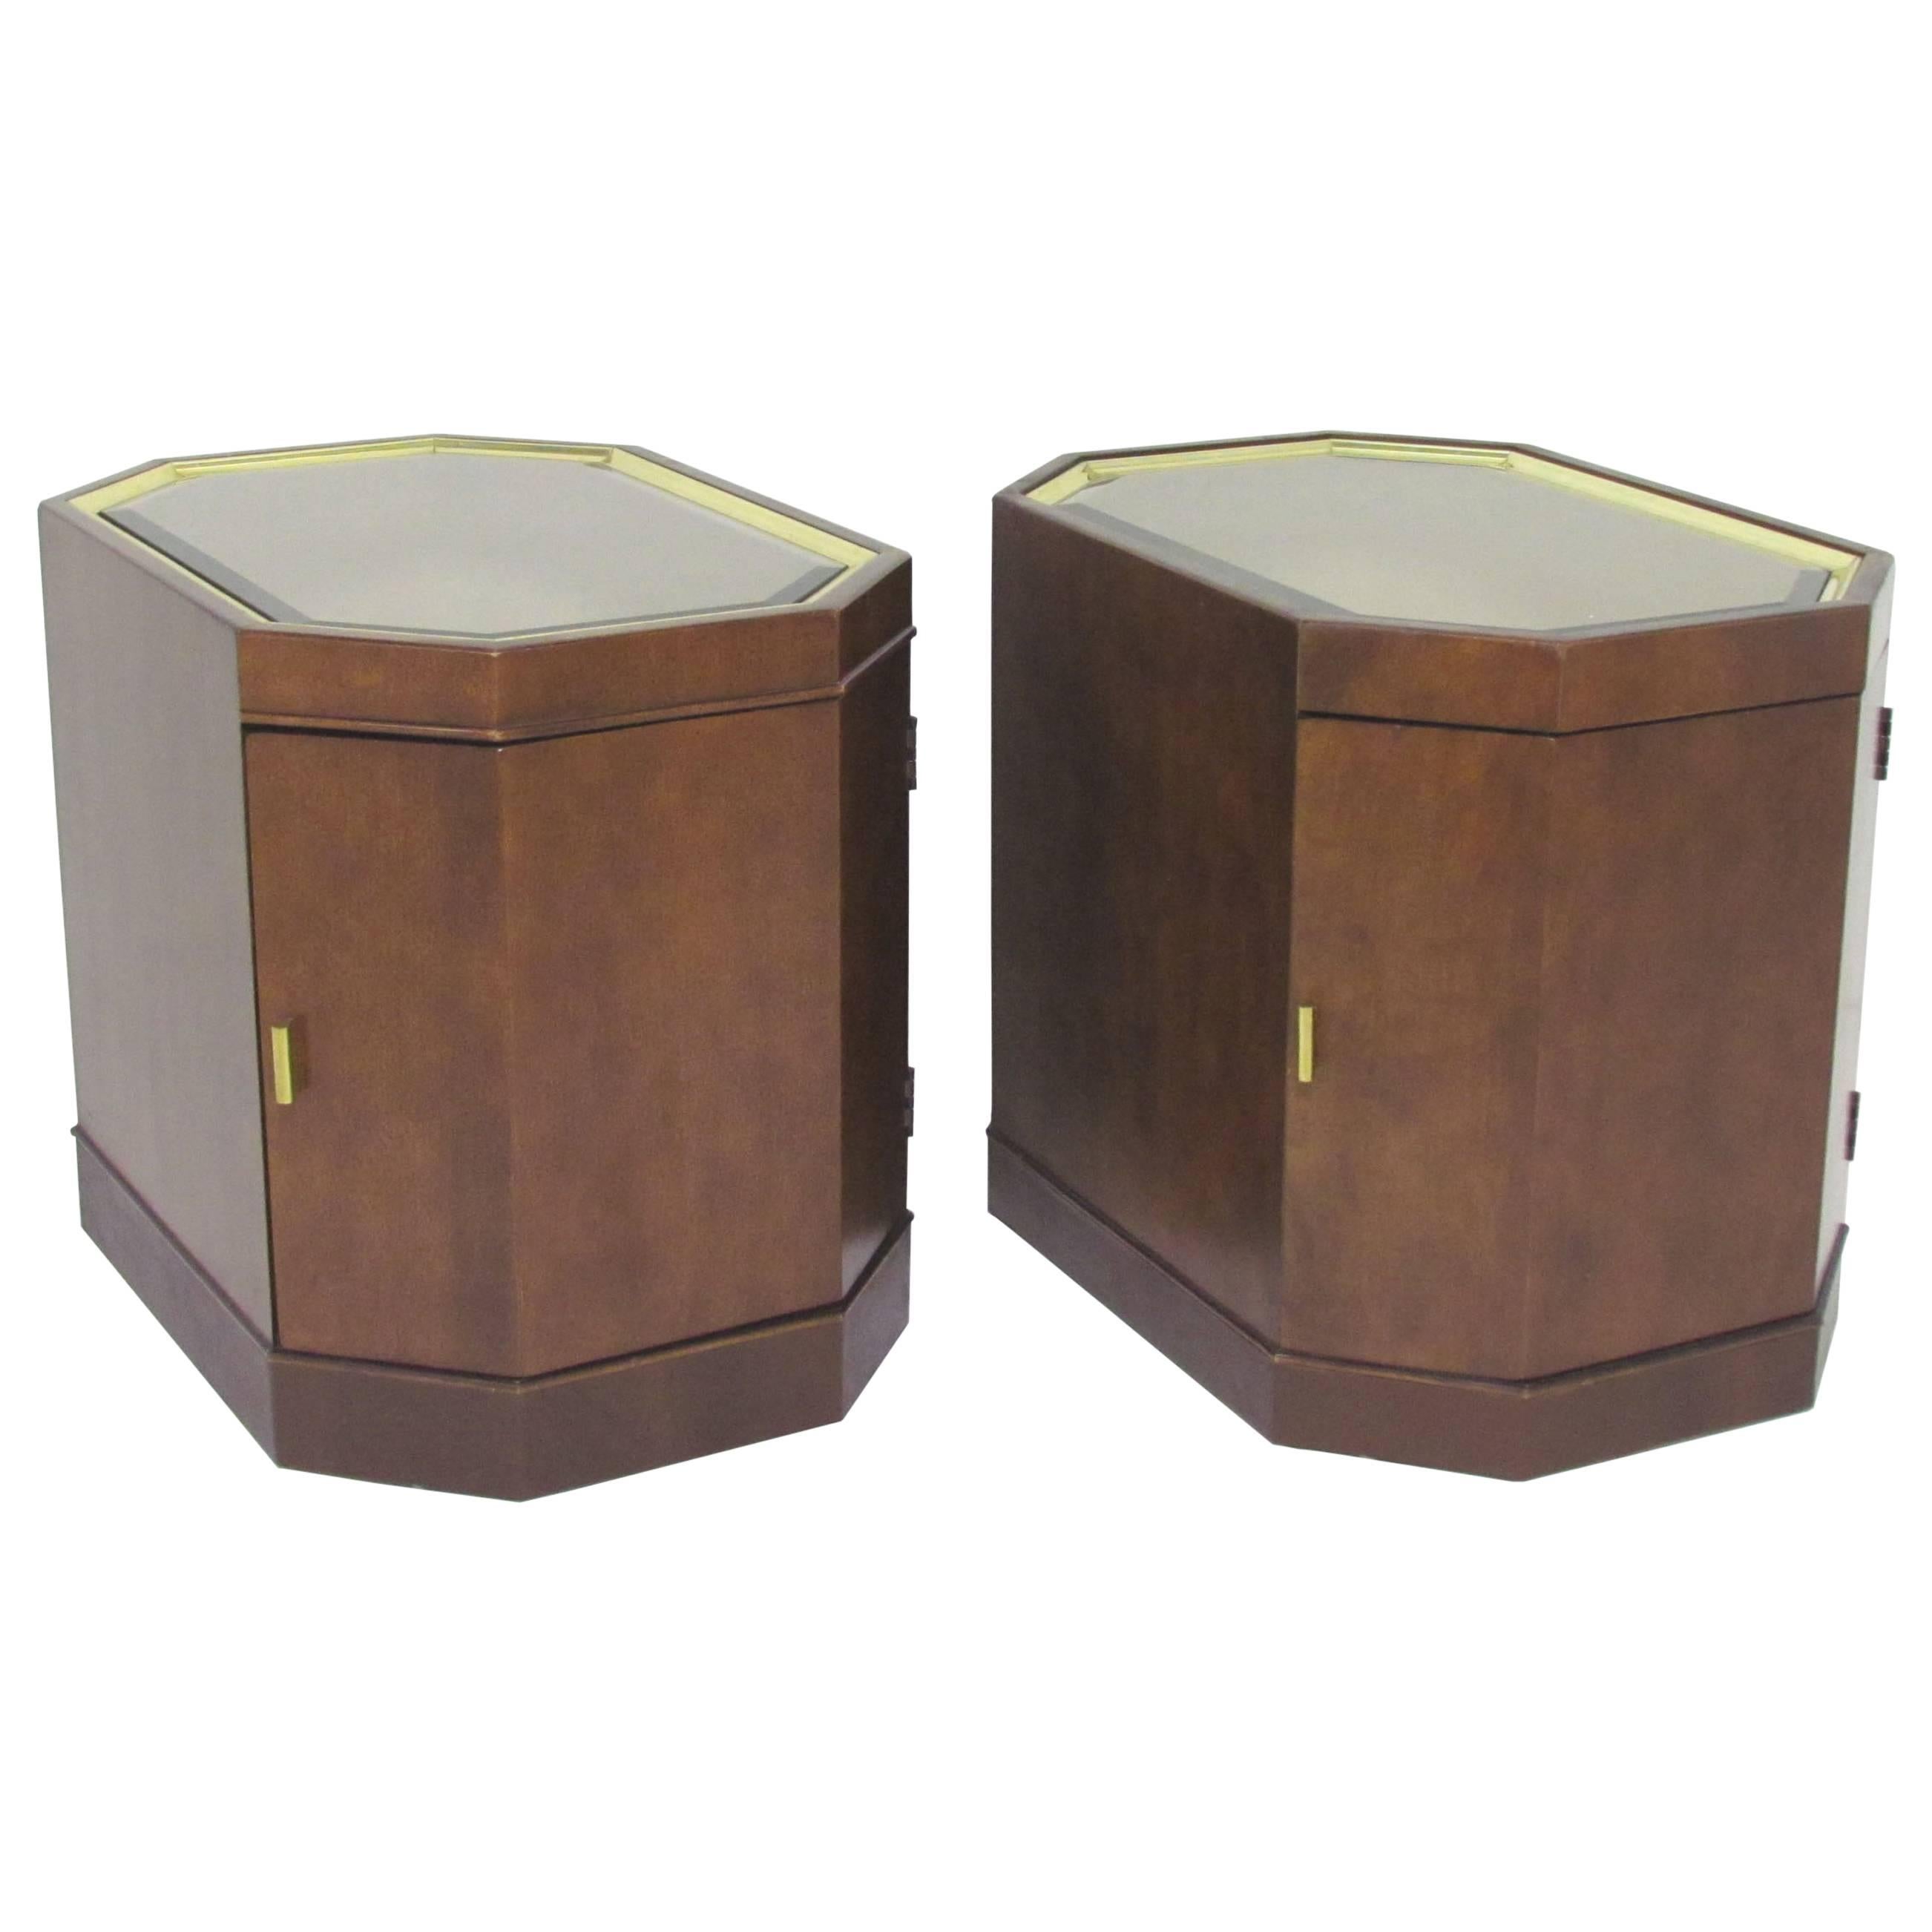 Pair of Mid-Century Octagonal End Tables or Nightstands in Manner of Probber